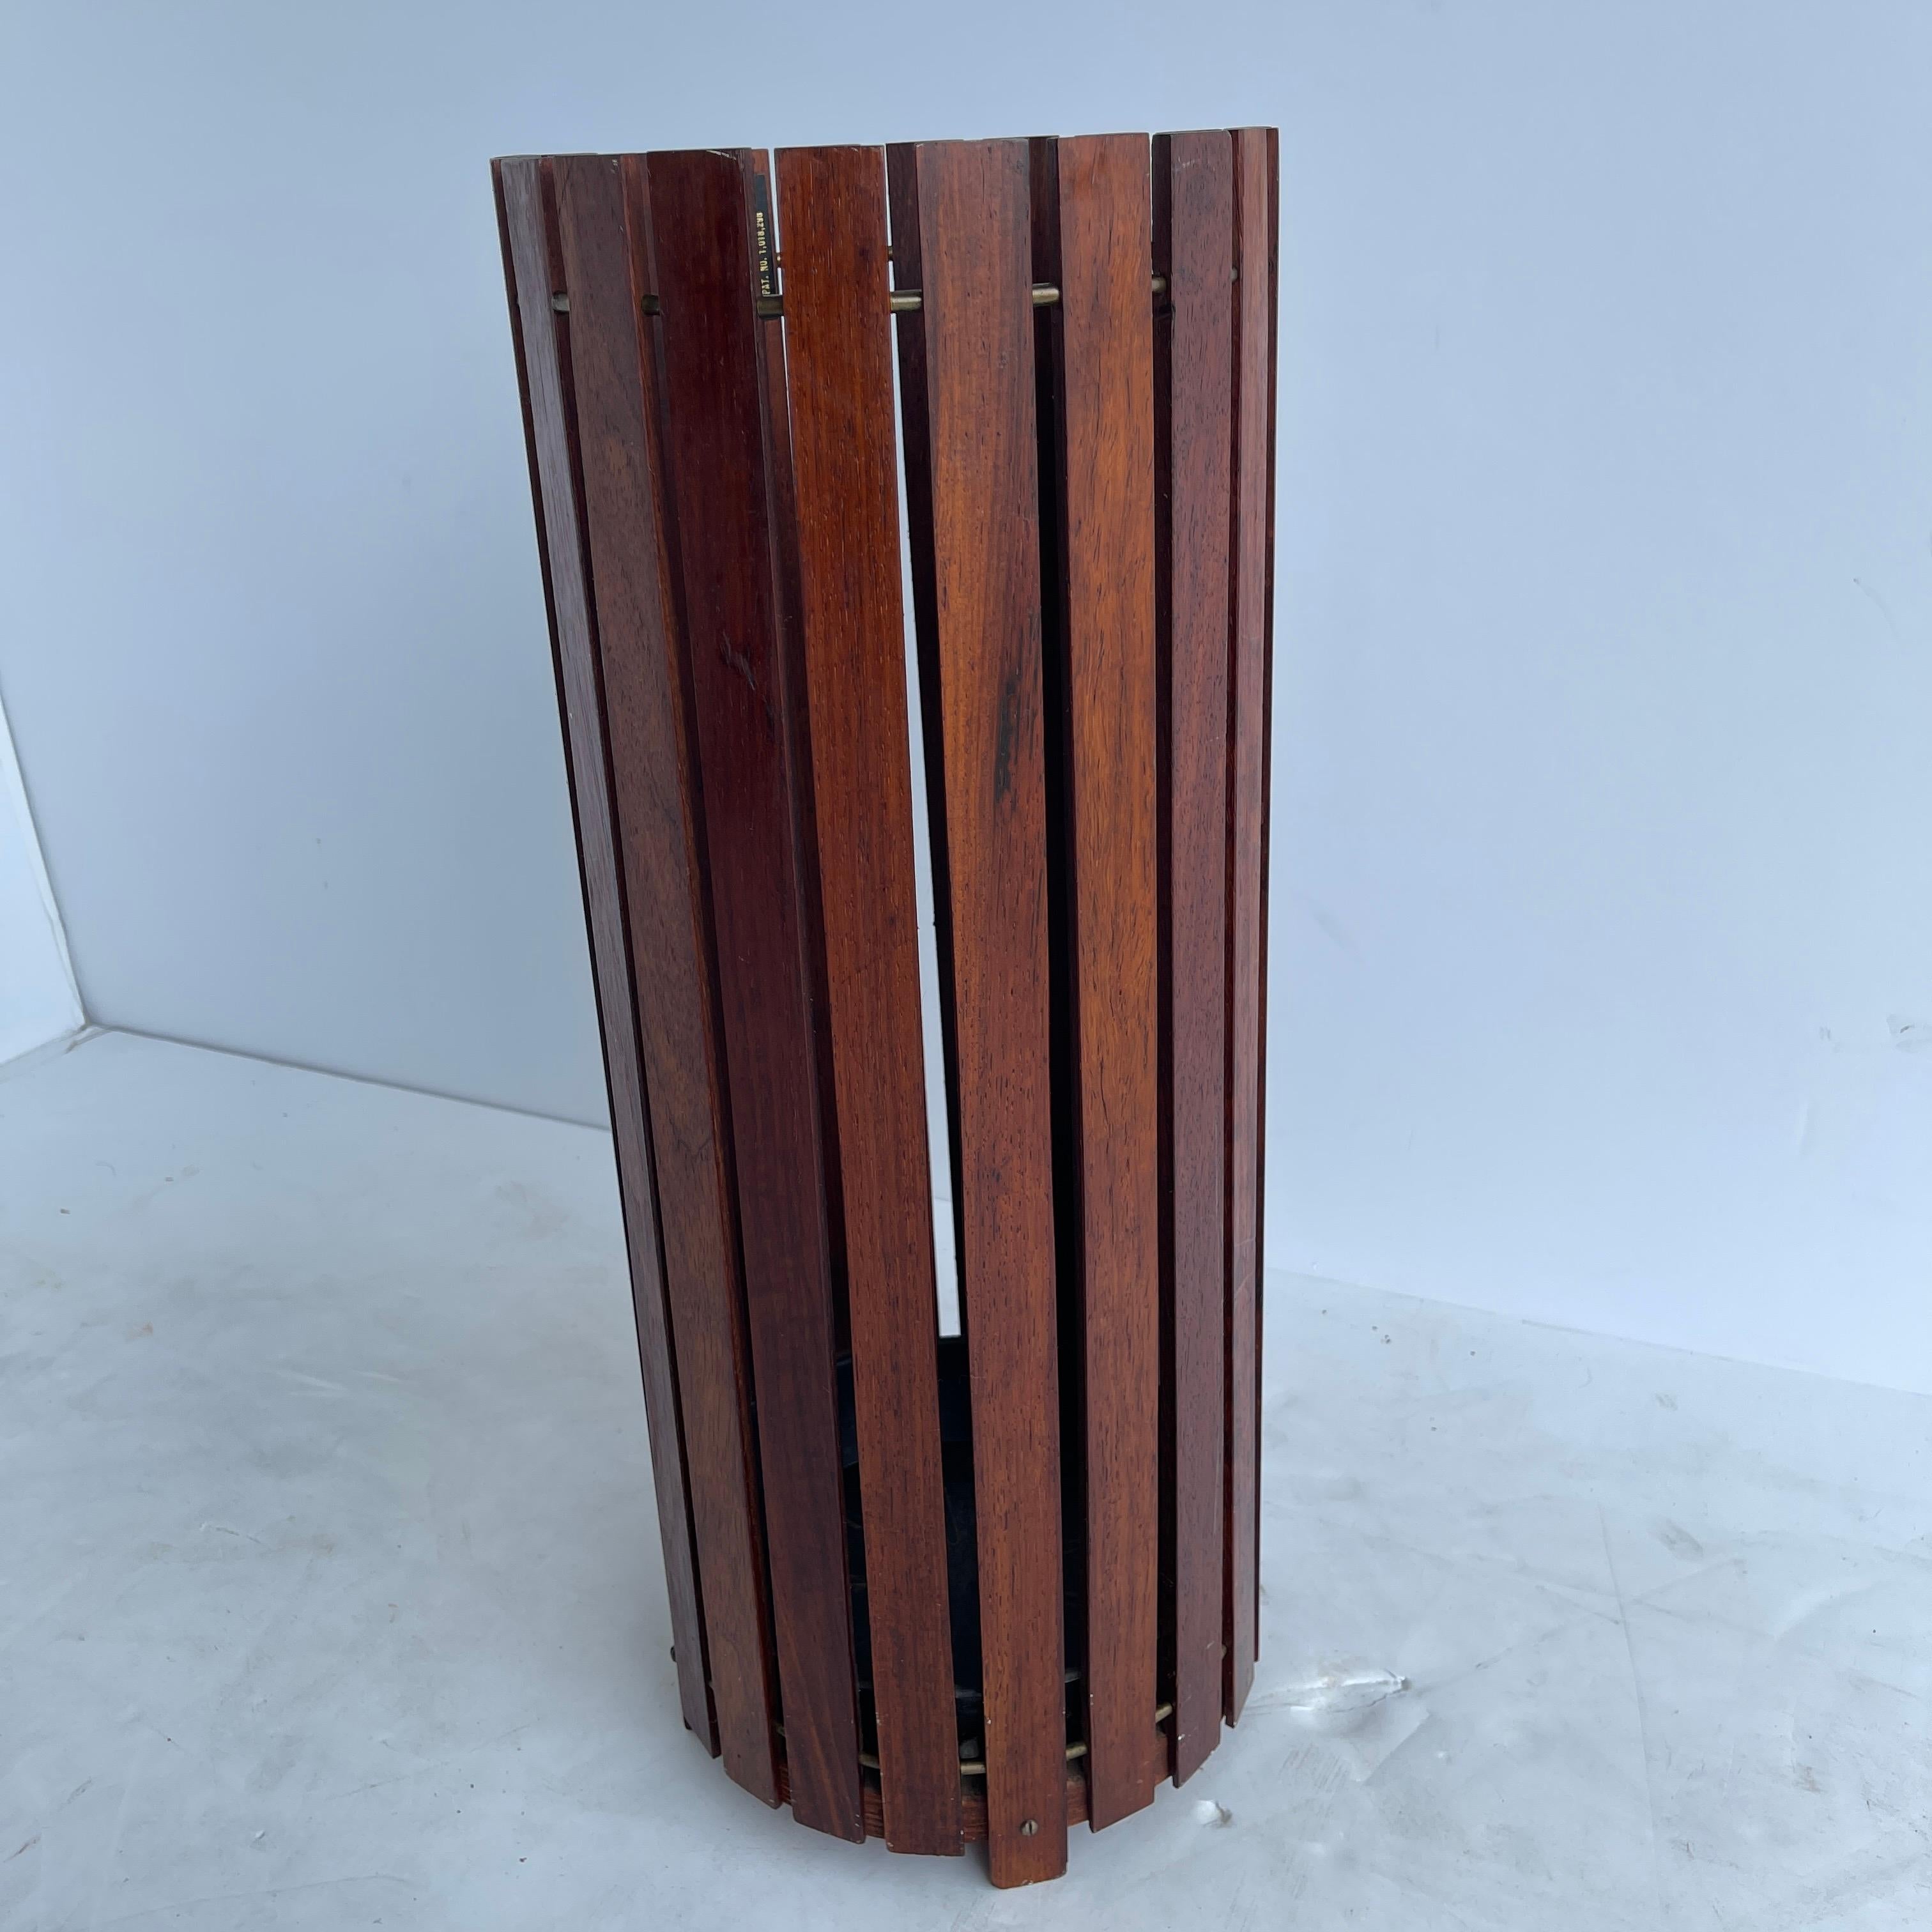 Mid-Century Modern walnut umbrella stand, England circa 1960's.
Tagged made in England by Gladlyn Ware, this lovely and sturdy umbrella stand has rich walnut slats separated by brass rods. In good vintage condition, the umbrella stand will be a